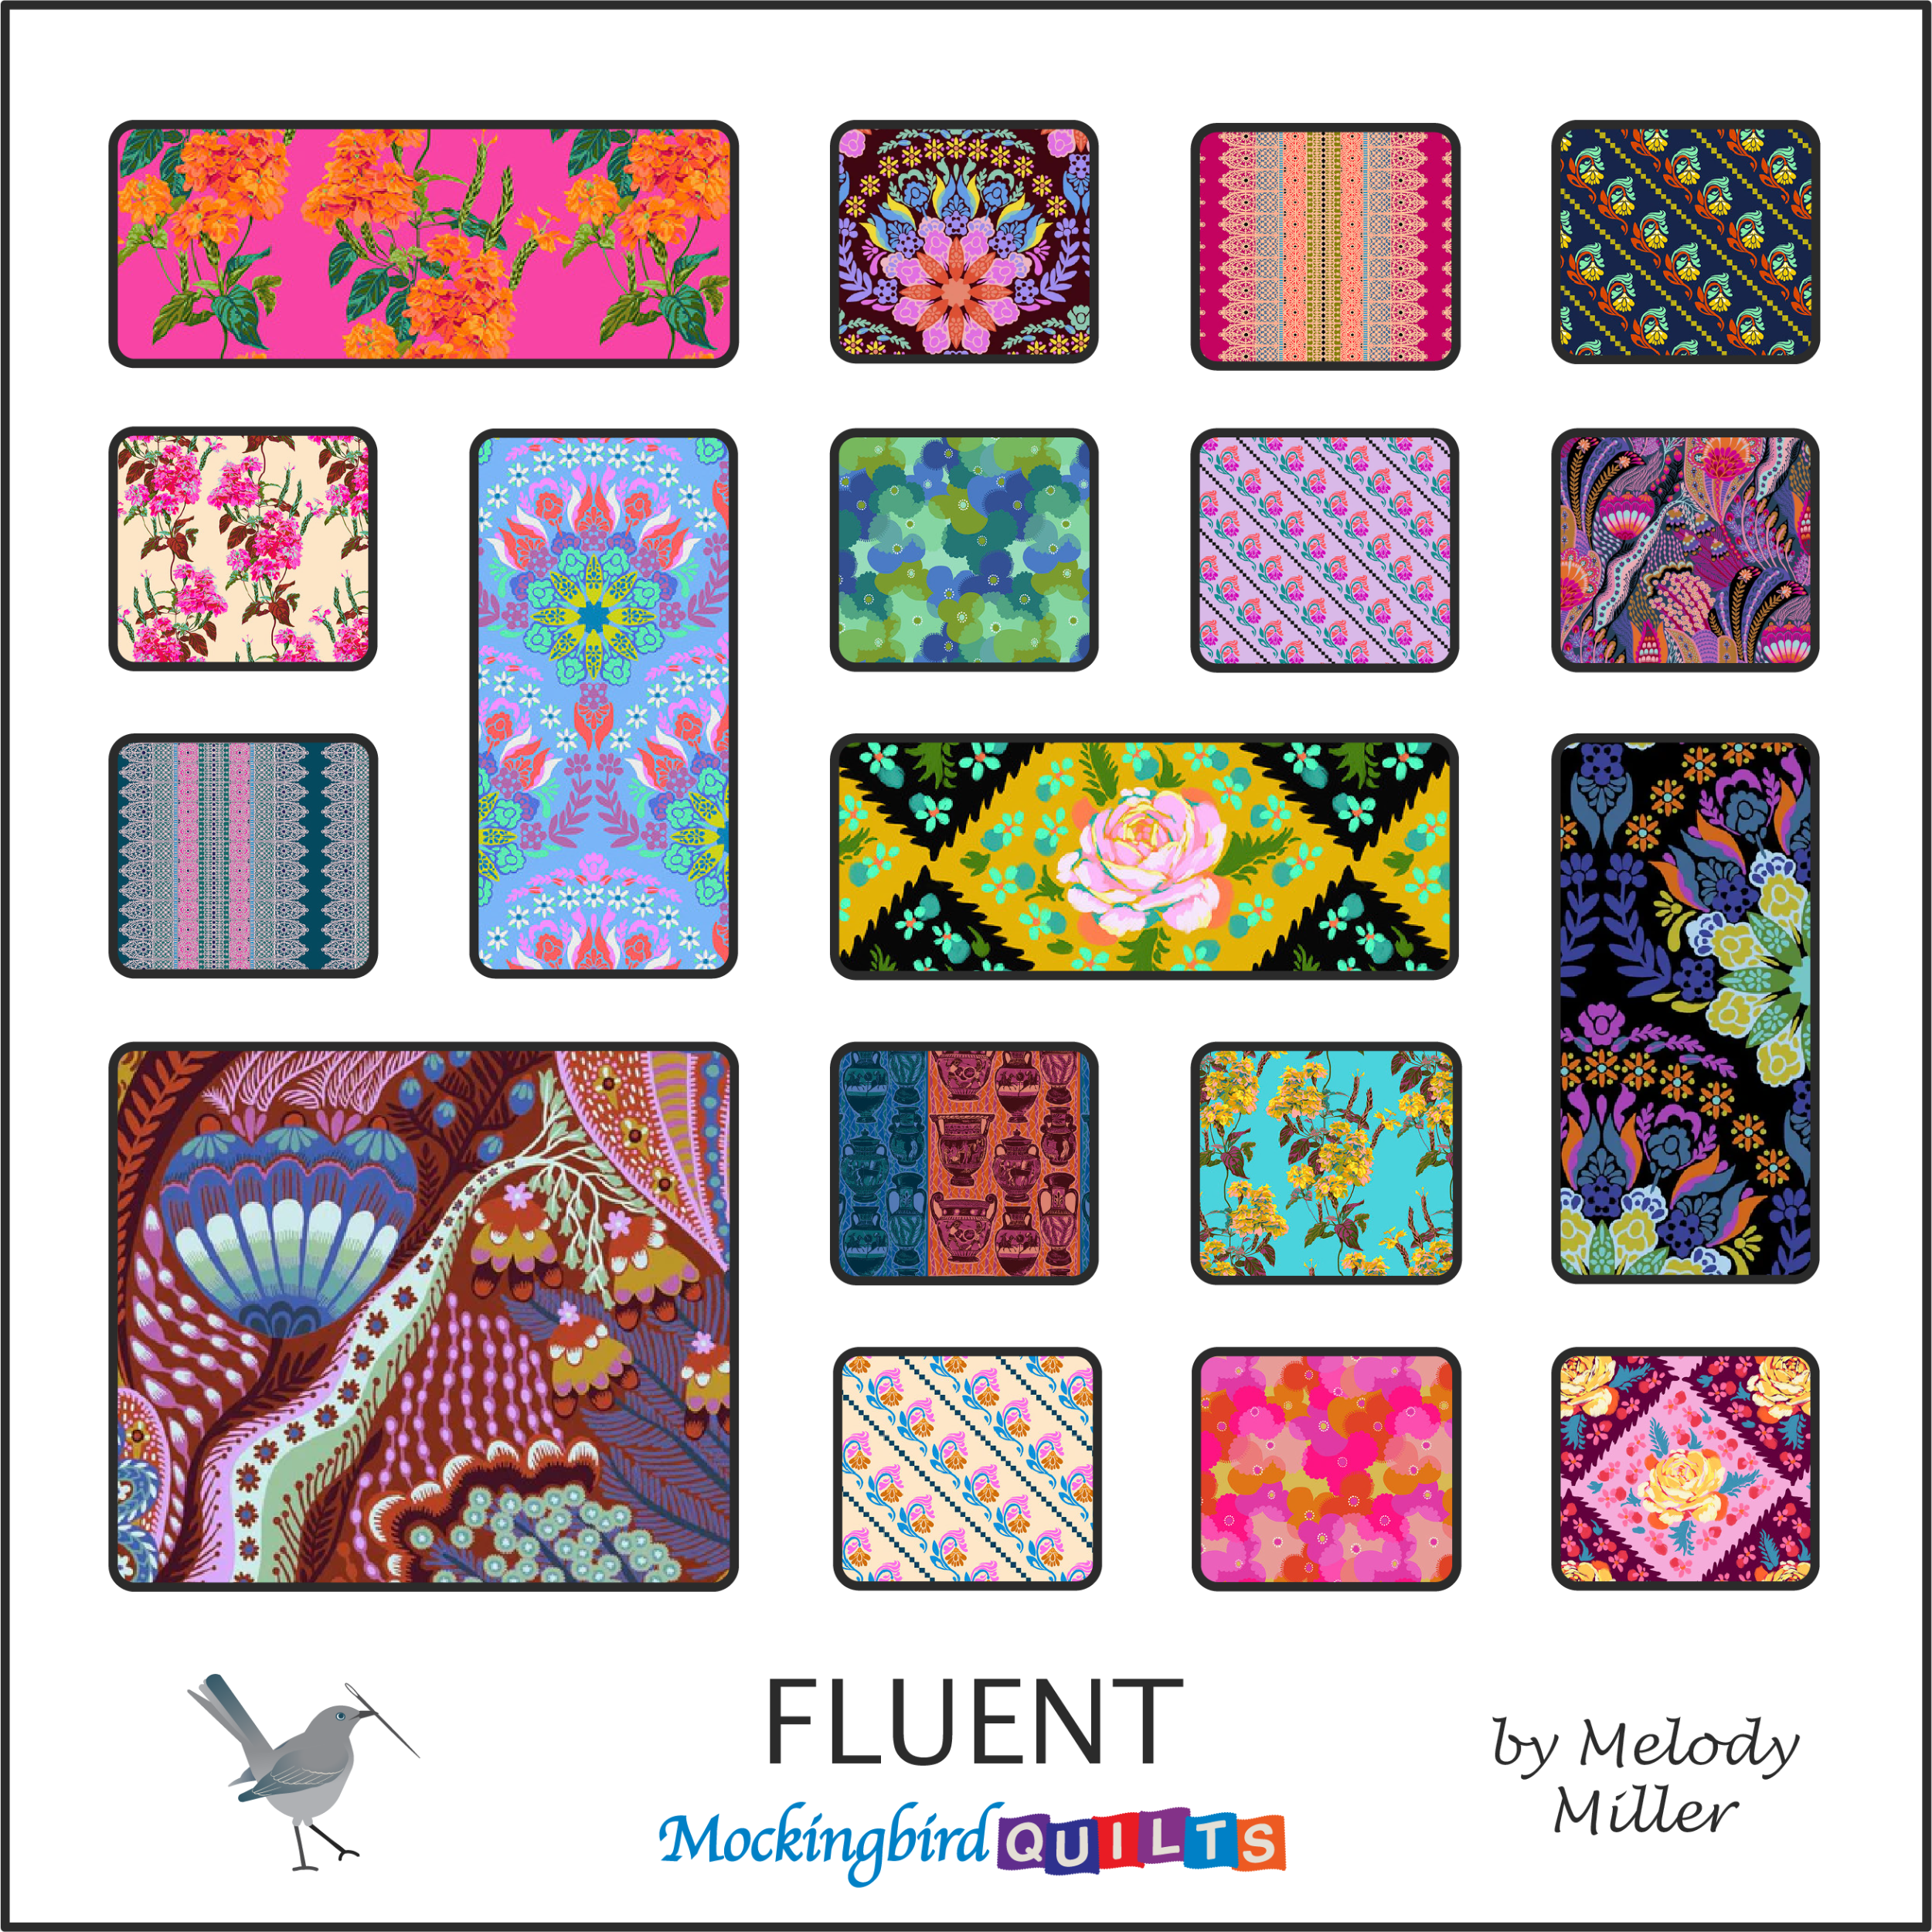 This image shows eighteen fabric swatches in the collection “Fluent” by Anna Maria Horner. Prints in this line are vibrant and colorful, featuring bold florals, technicolor paisley, Grecian urns, and dynamic lace.